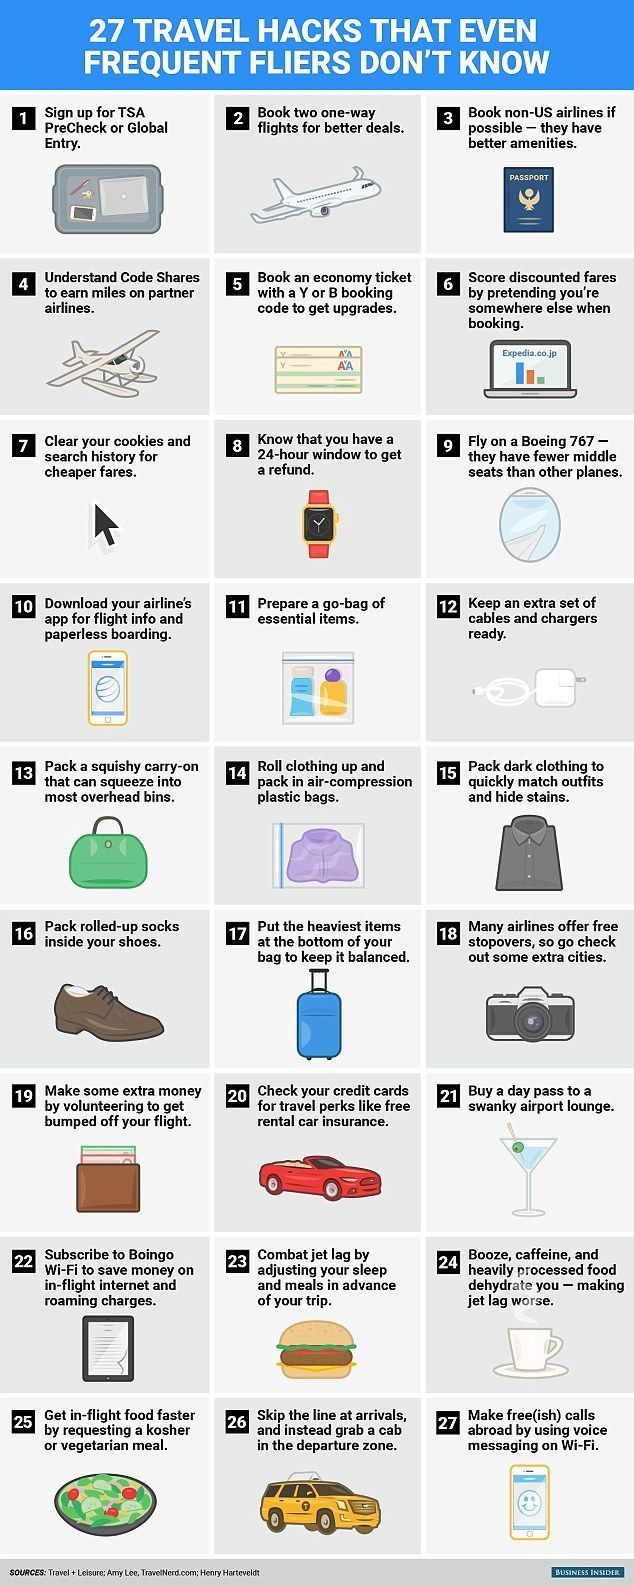 There 27 hacks are extremely helpful for vacation. Some you’ve probably never heard before.